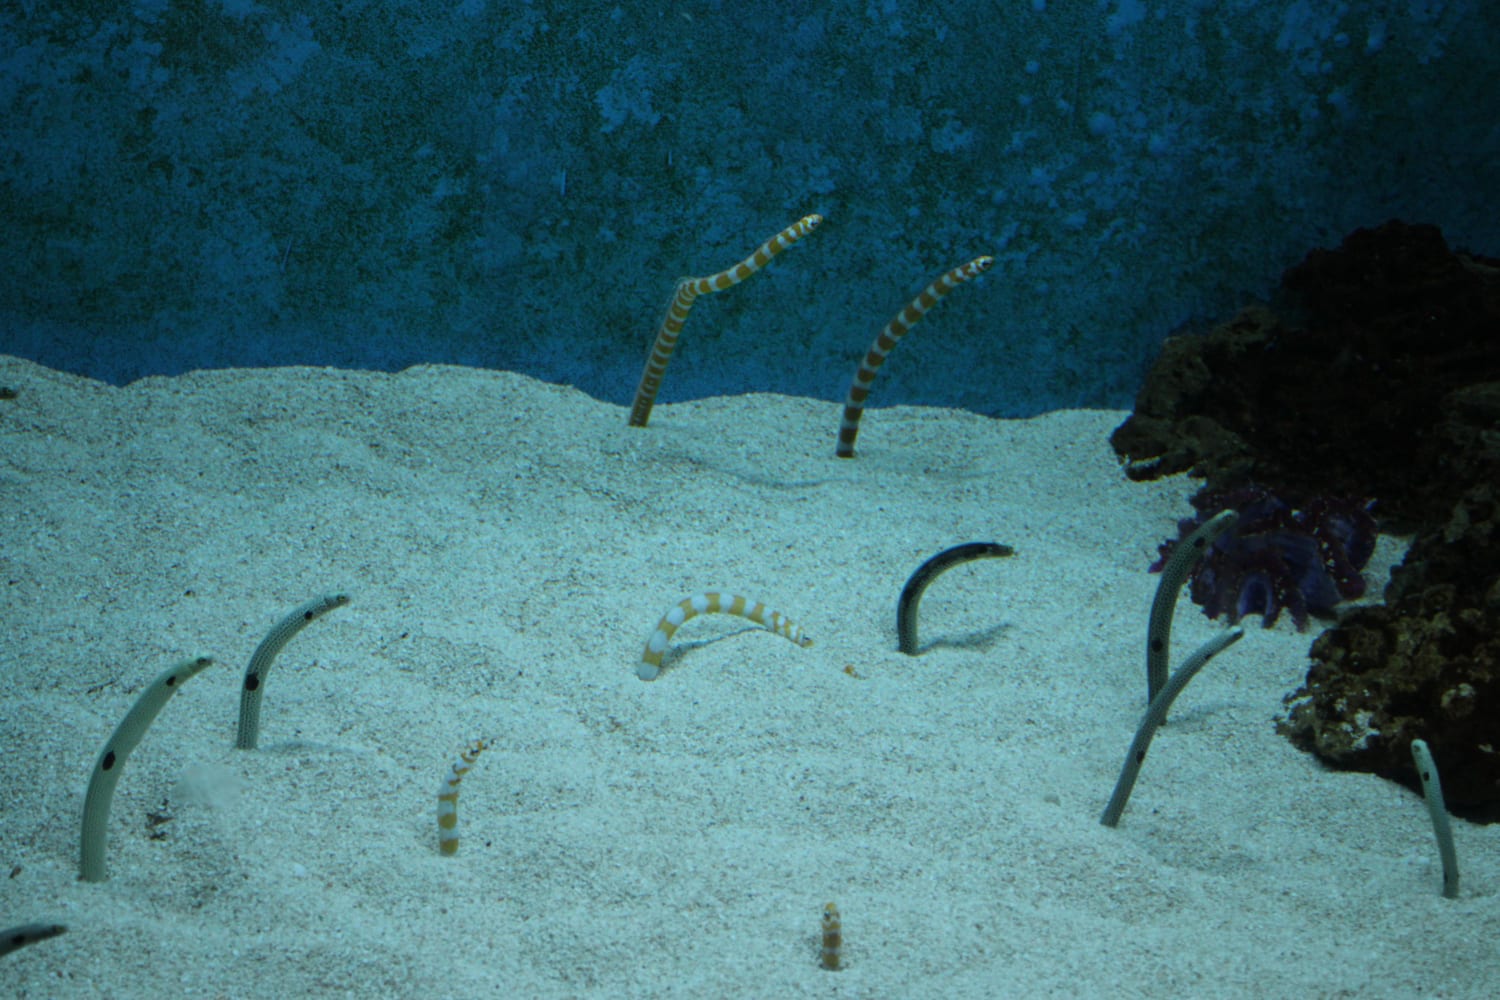 Some Garden Eels at a local museum